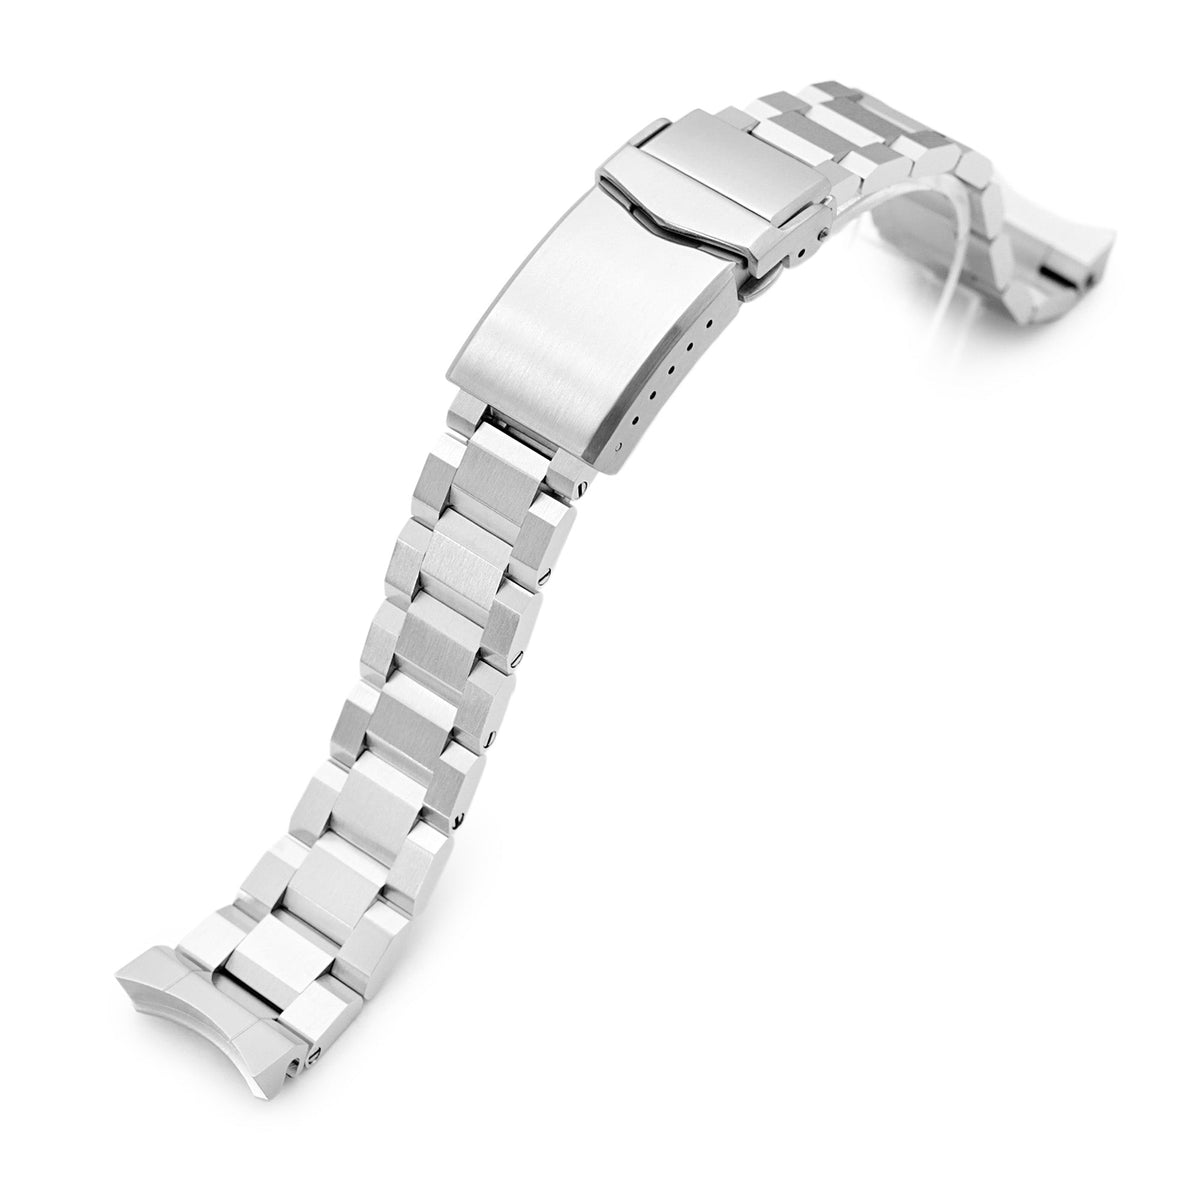 19mm Hexad III Watch Band for Grand Seiko 44GS SBGJ235, 316L Stainless Steel Brushed V-Clasp Strapcode Watch Bands